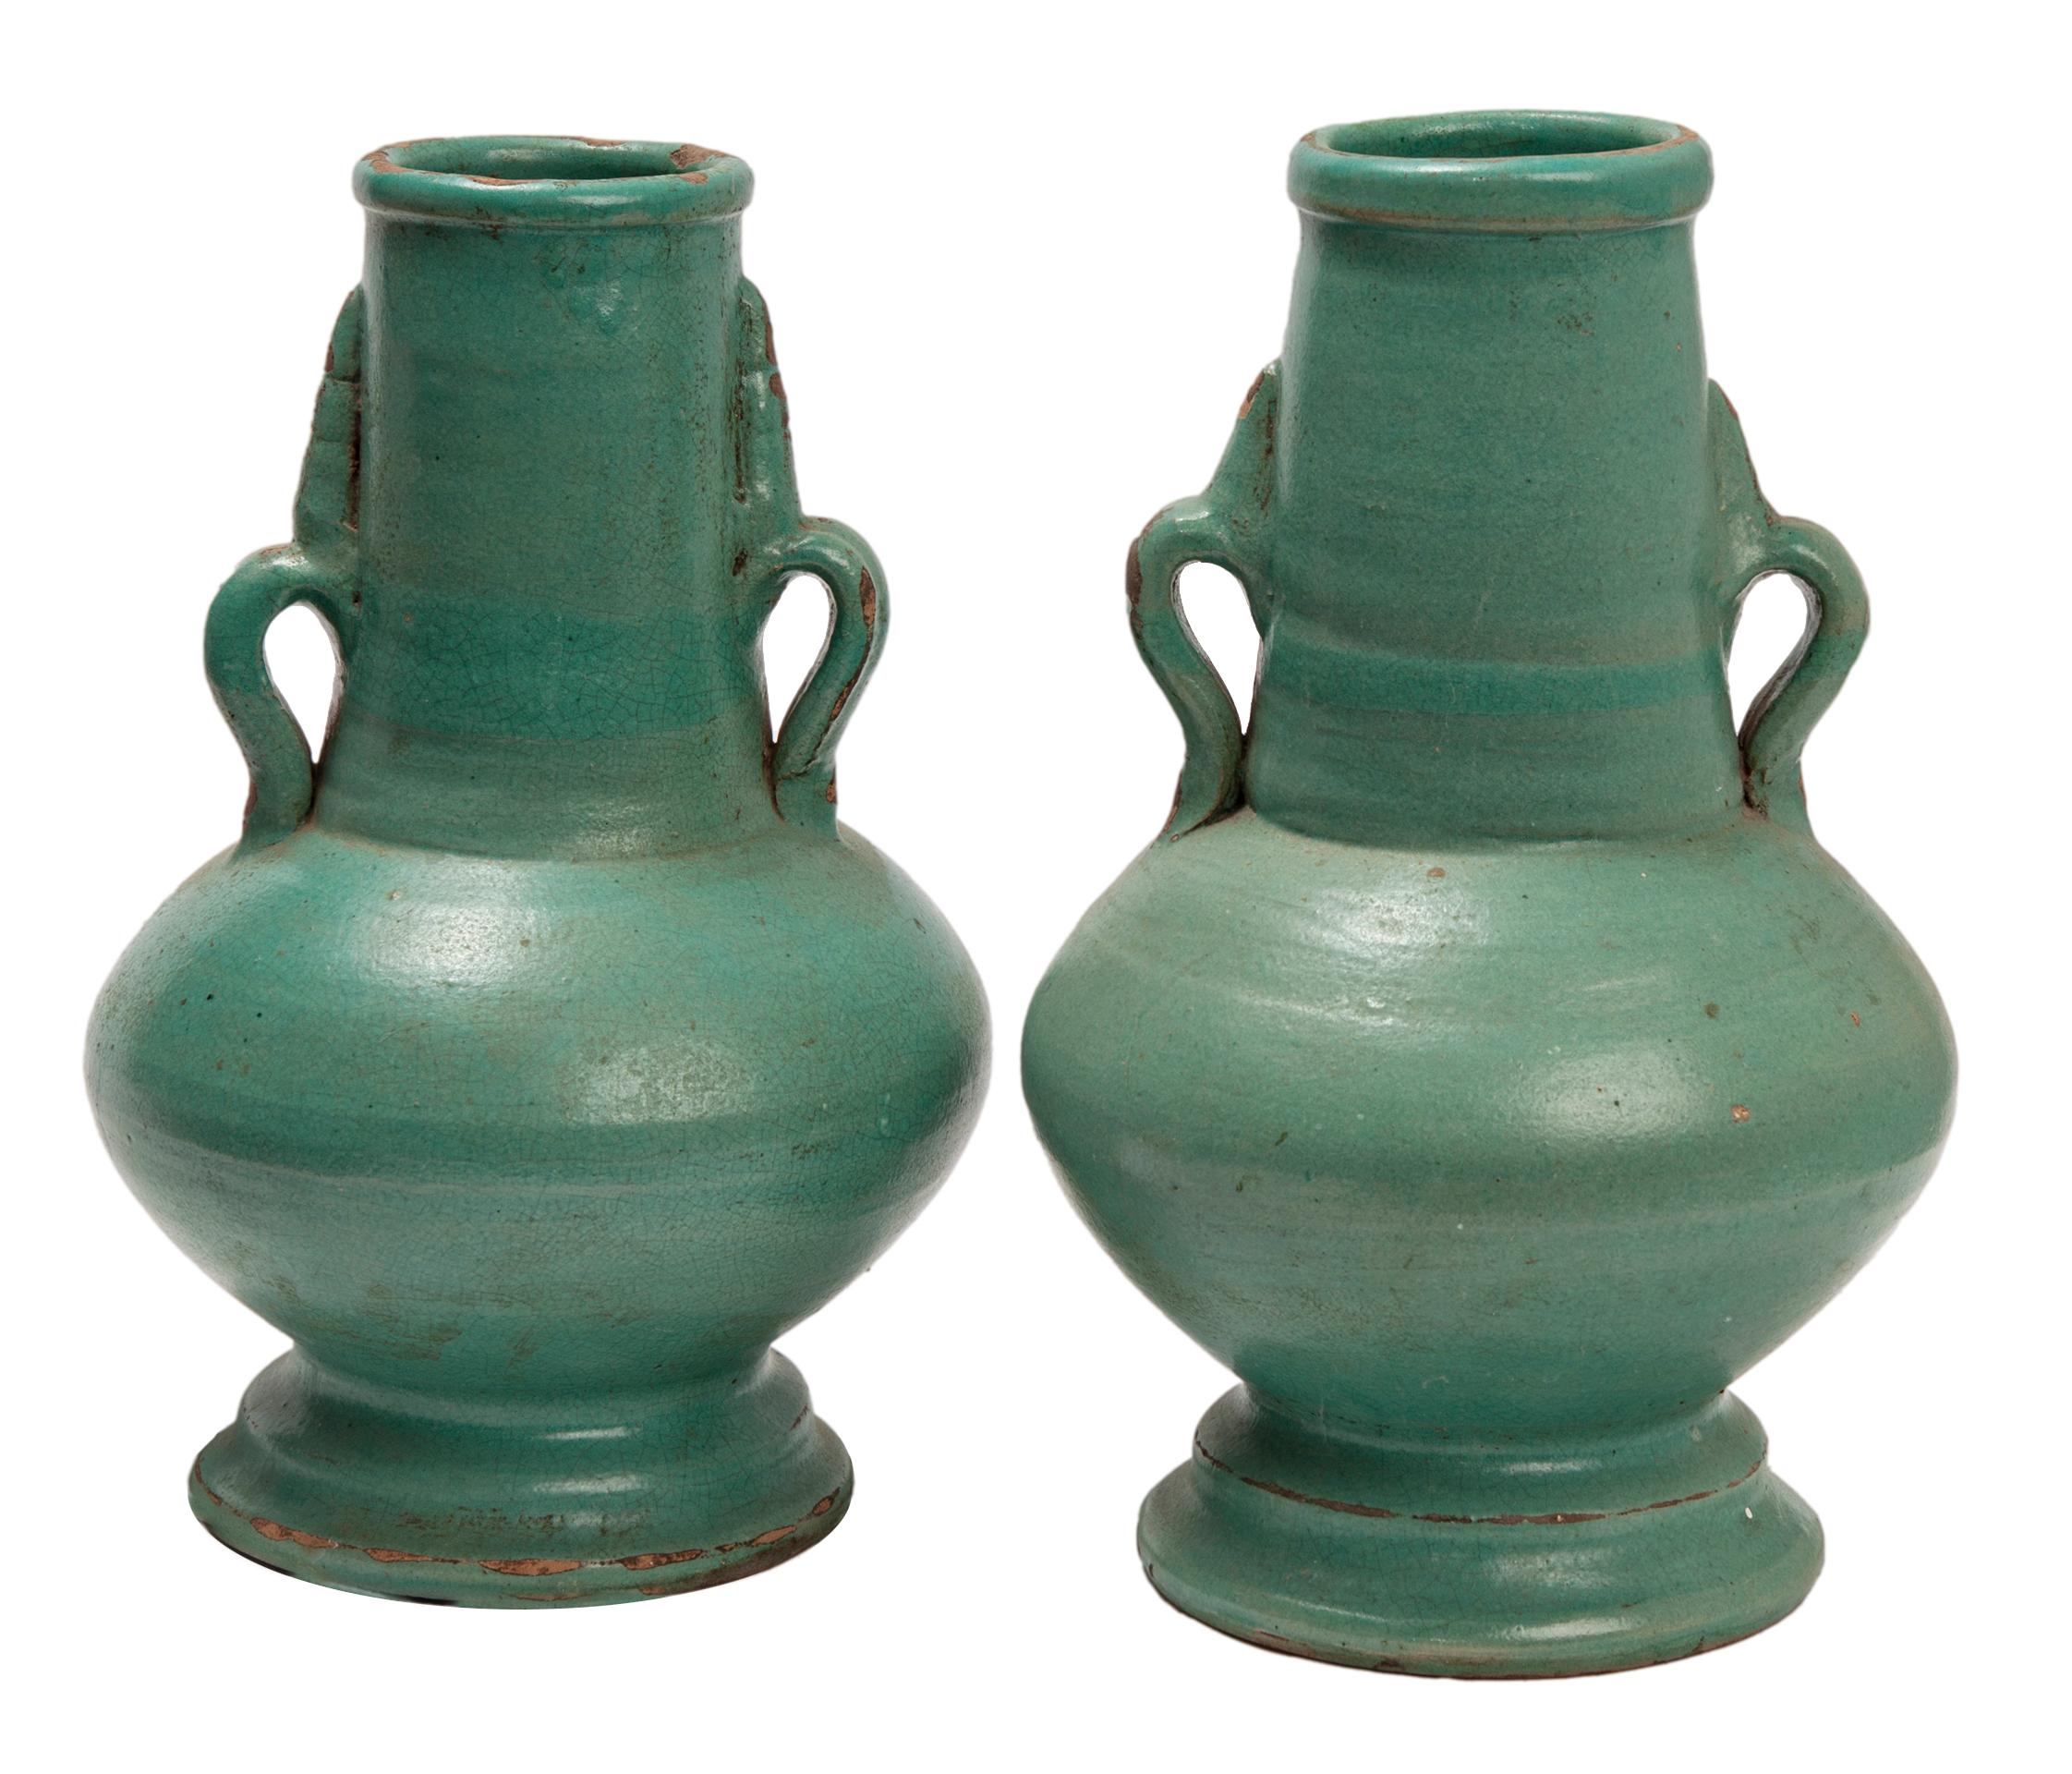 Hand Raised Moroccan Ceramic Vases with a matte green glaze. These Moroccan vessels created in the style originally used by Berber tribes to store water. Moroccan ceramics are defined by a confluence of influences, geography & melding cultures which